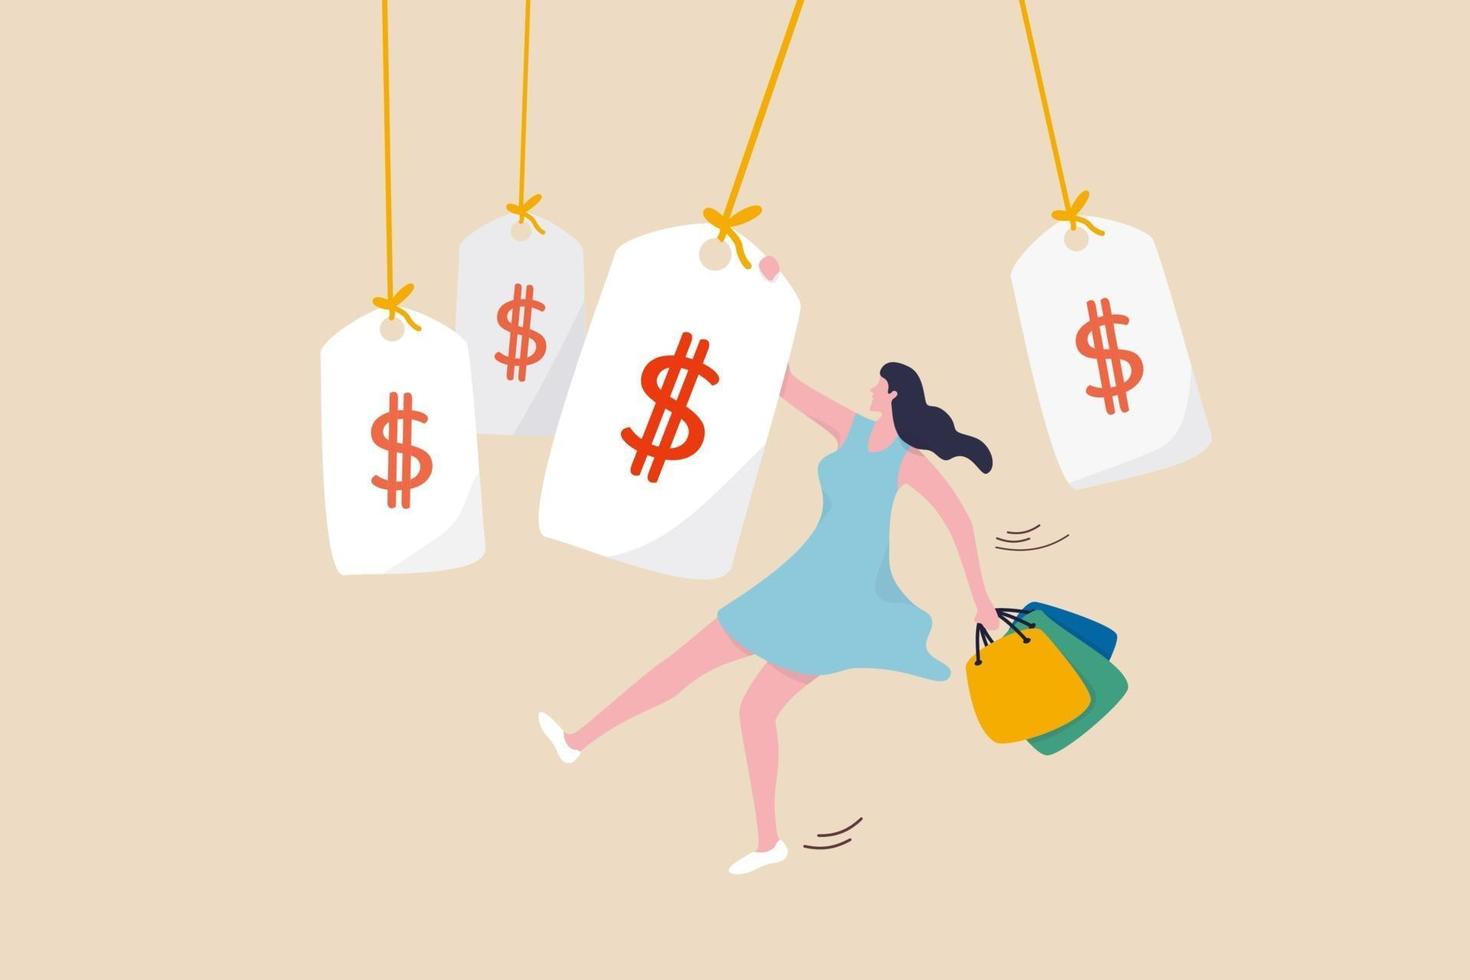 Shopping promotion, consumerism, happiness of buying stuffs, clothes or fashion for lady concept, happy young cute lady wearing beautiful stylist dresses holding shopping bags hung on sale price tag. vector